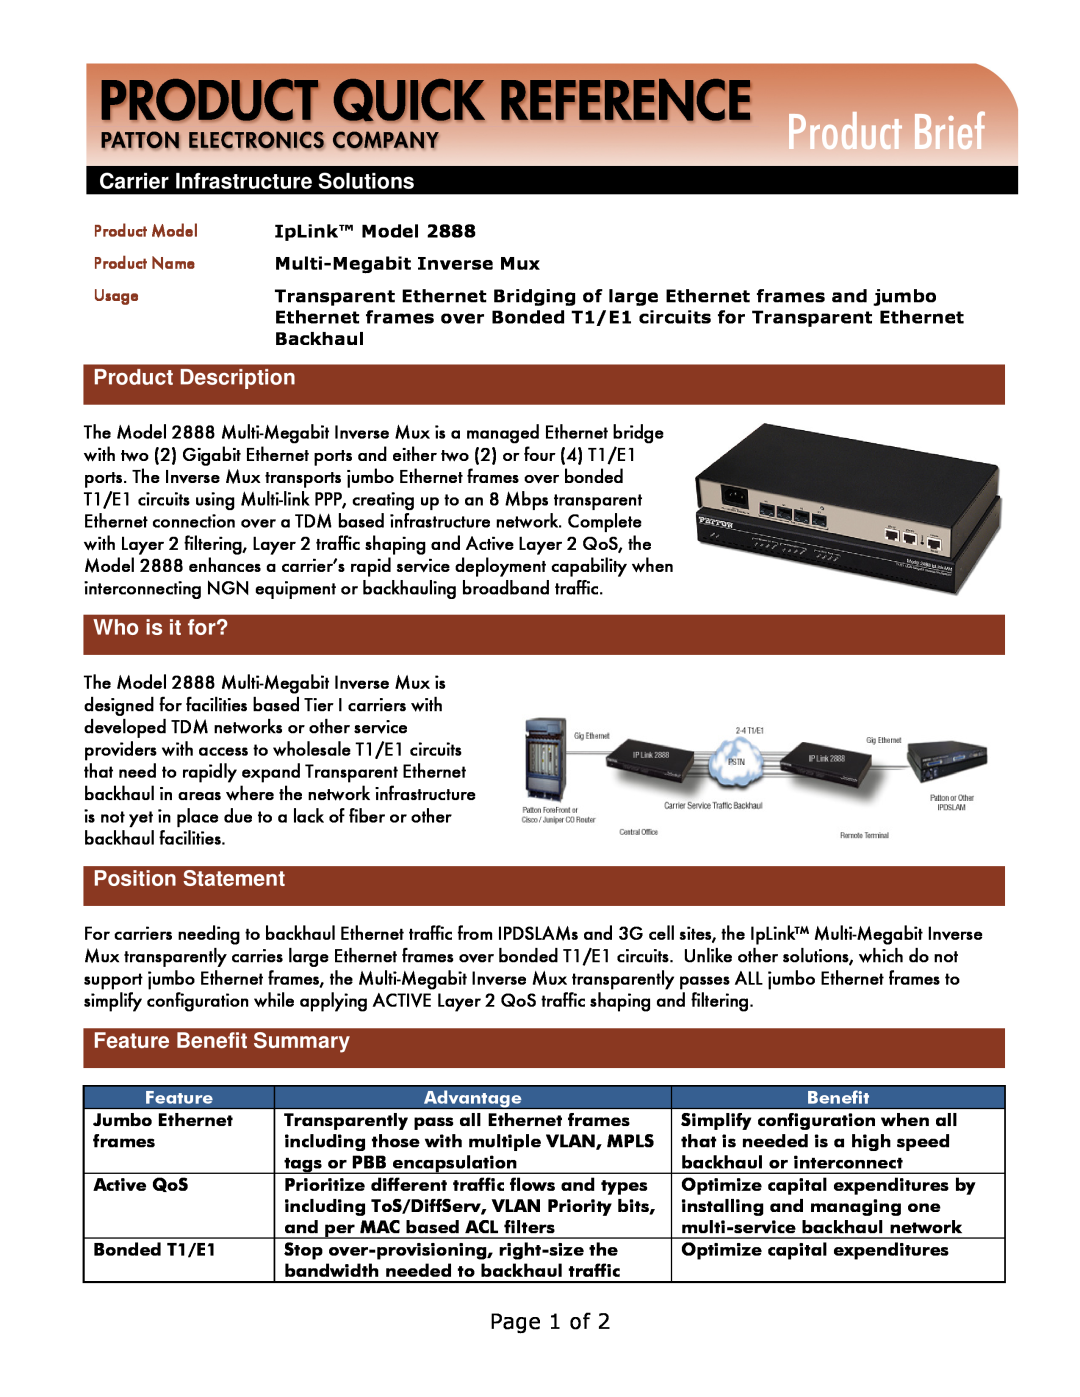 Patton electronic 2888 manual Product Brief, Carrier Infrastructure Solutions, Product Description, Who is it for? 